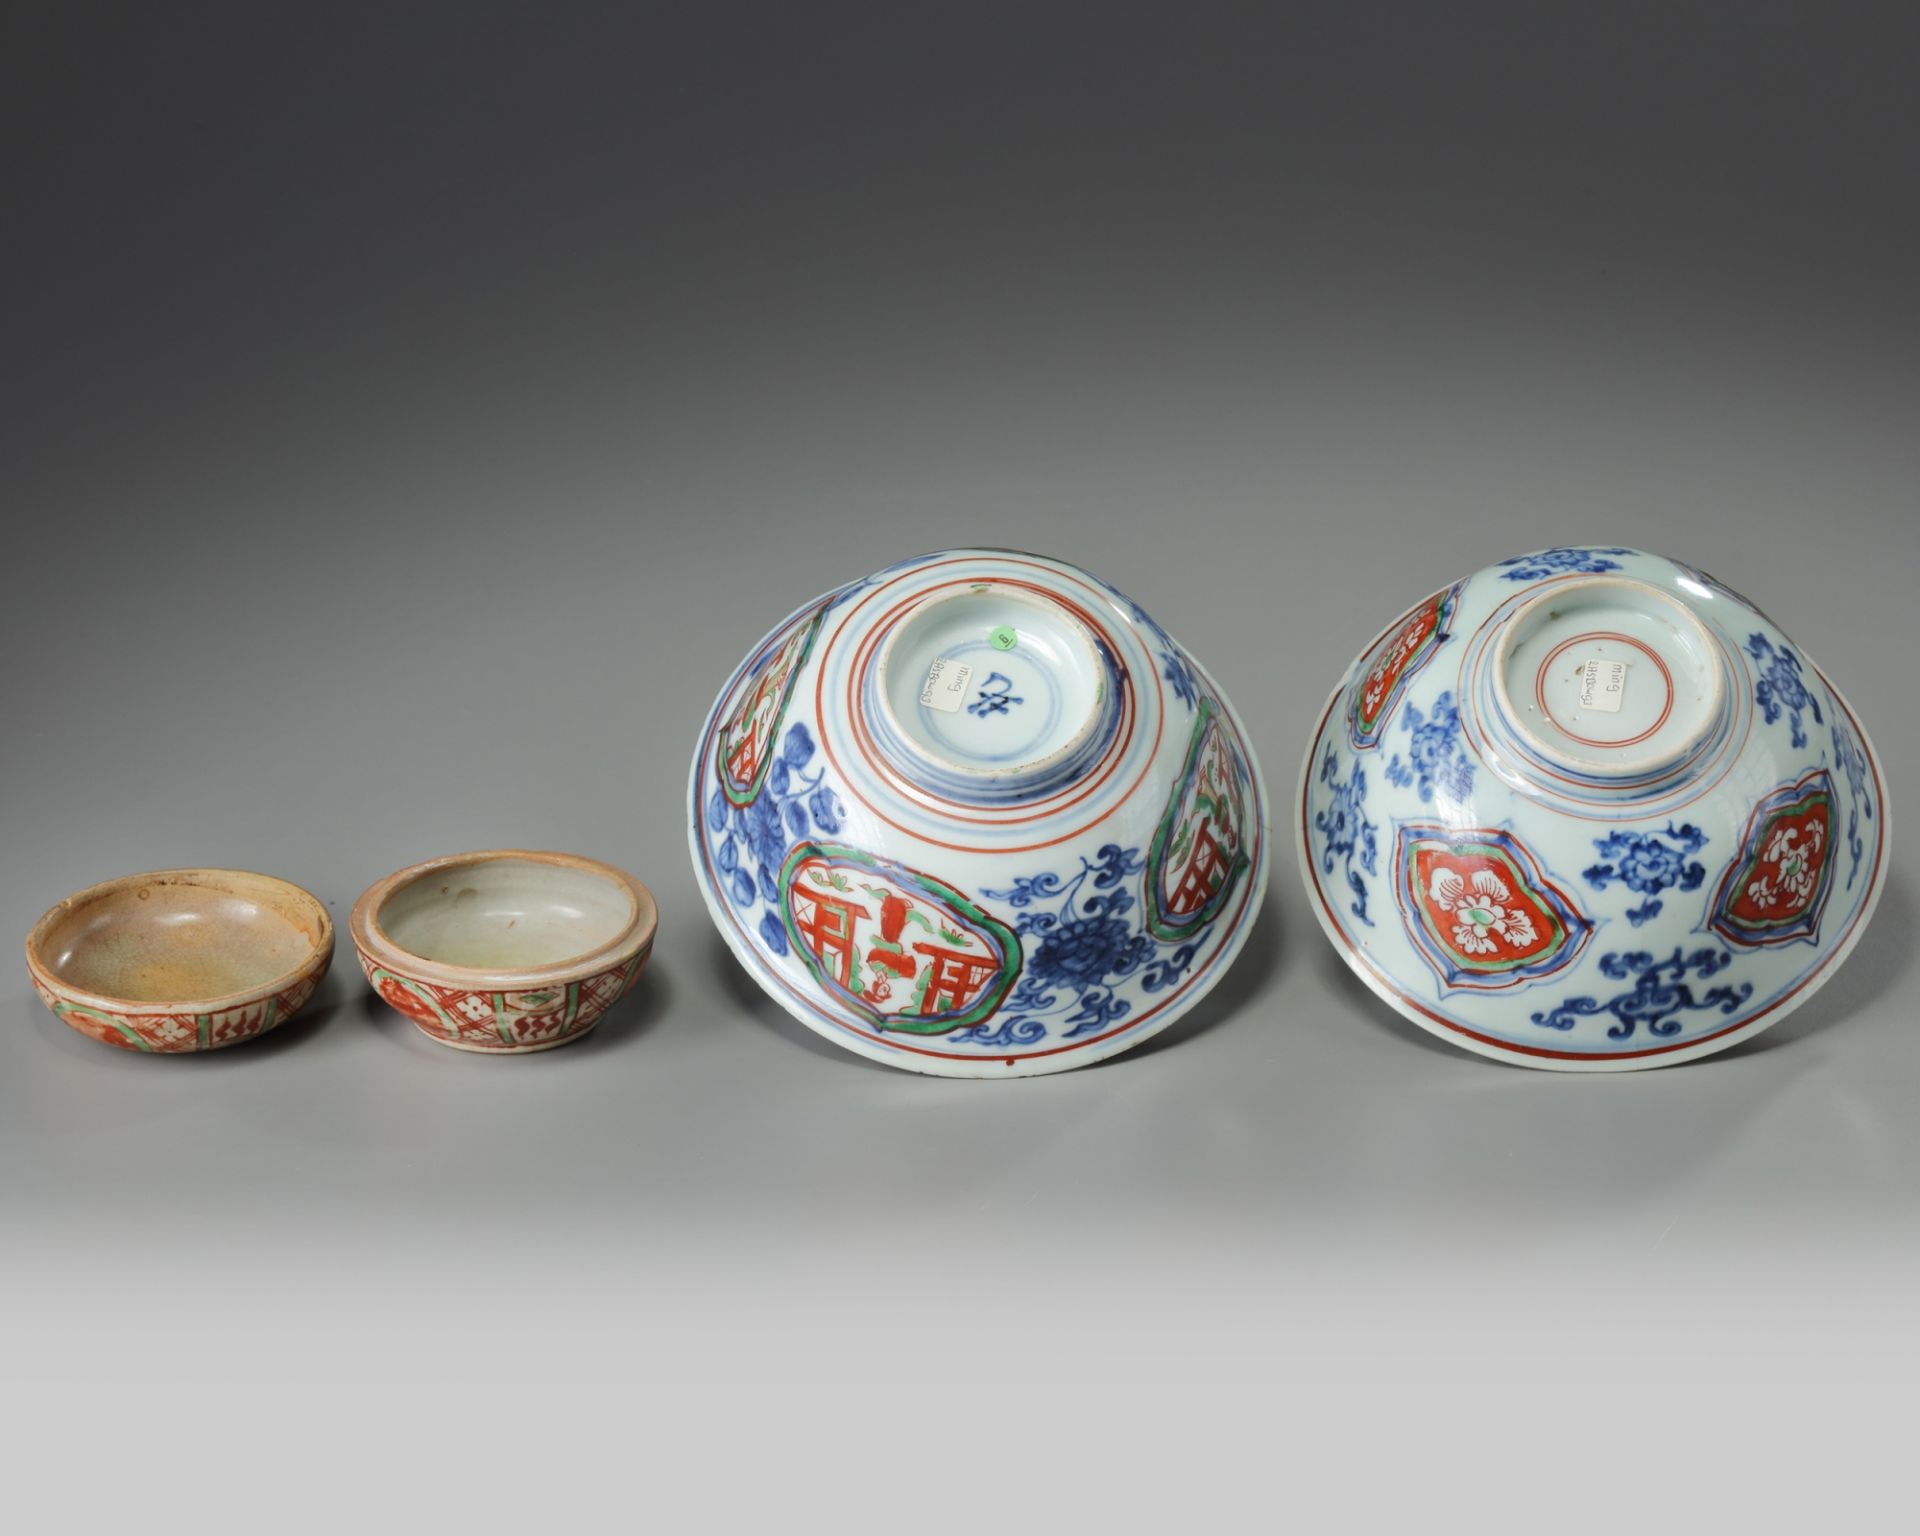 Two Chinese enamelled bowls and a round box and cover - Image 4 of 4